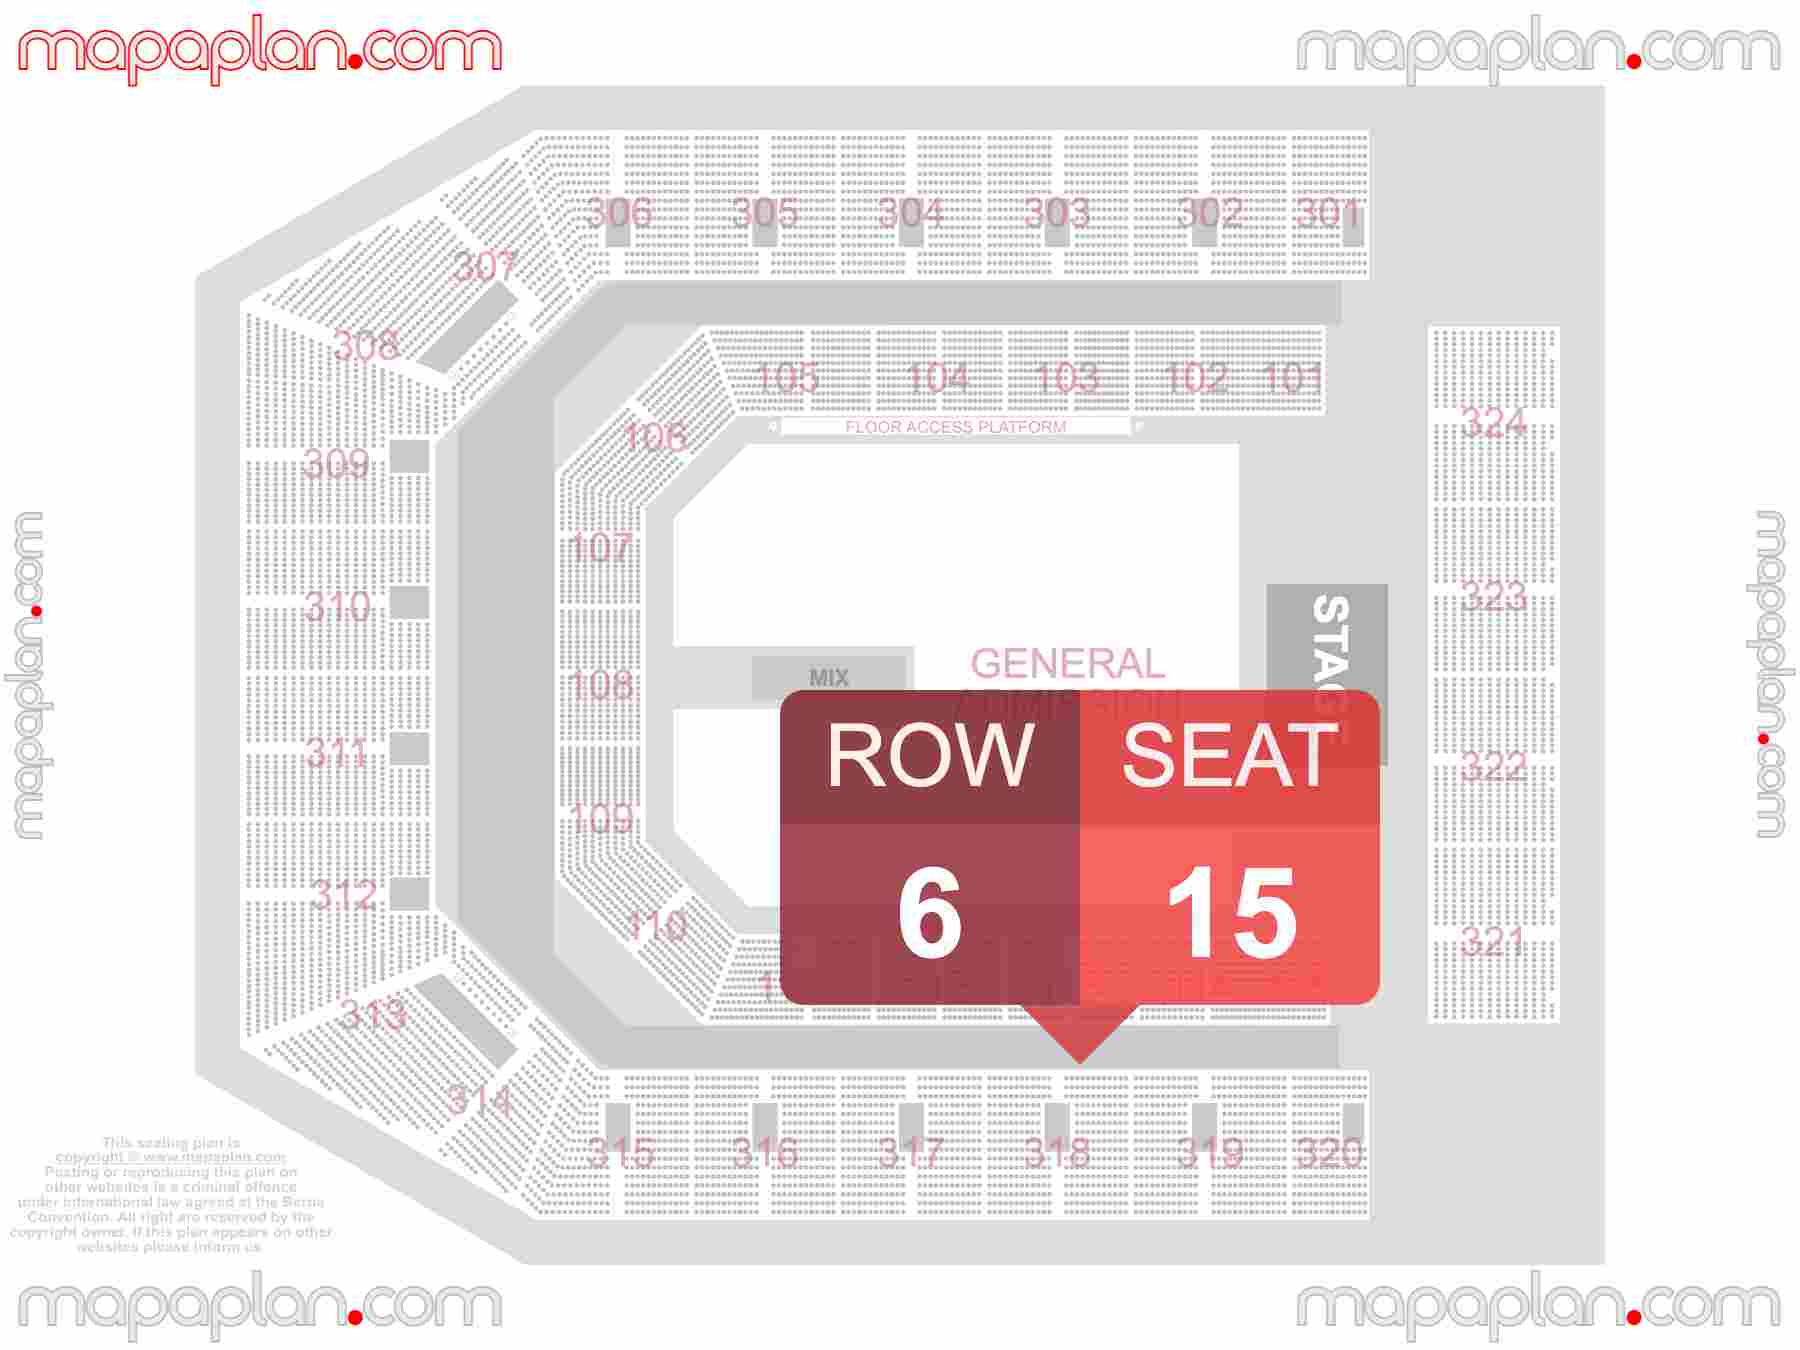 Manchester Co-op Live seating plan Concert with floor general admission standing inside capacity view arrangement chart - Interactive virtual 3d best seats & rows detailed stadium image configuration layout